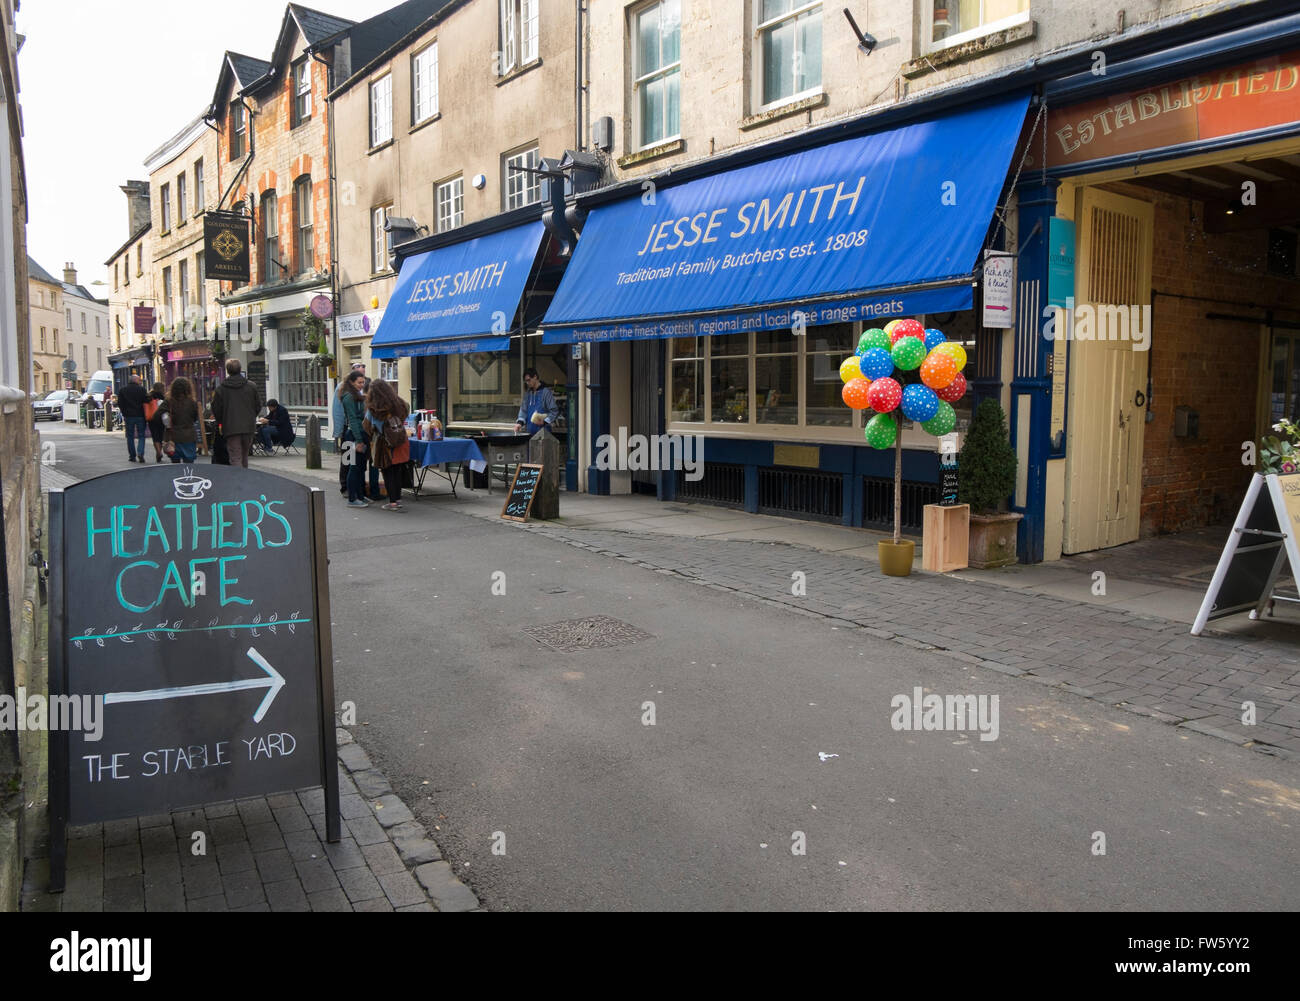 Burgers and sausages being cooked outside Jesse Smith butchers in Black Jack Street, Cirencester, Gloucestershire, UK Stock Photo